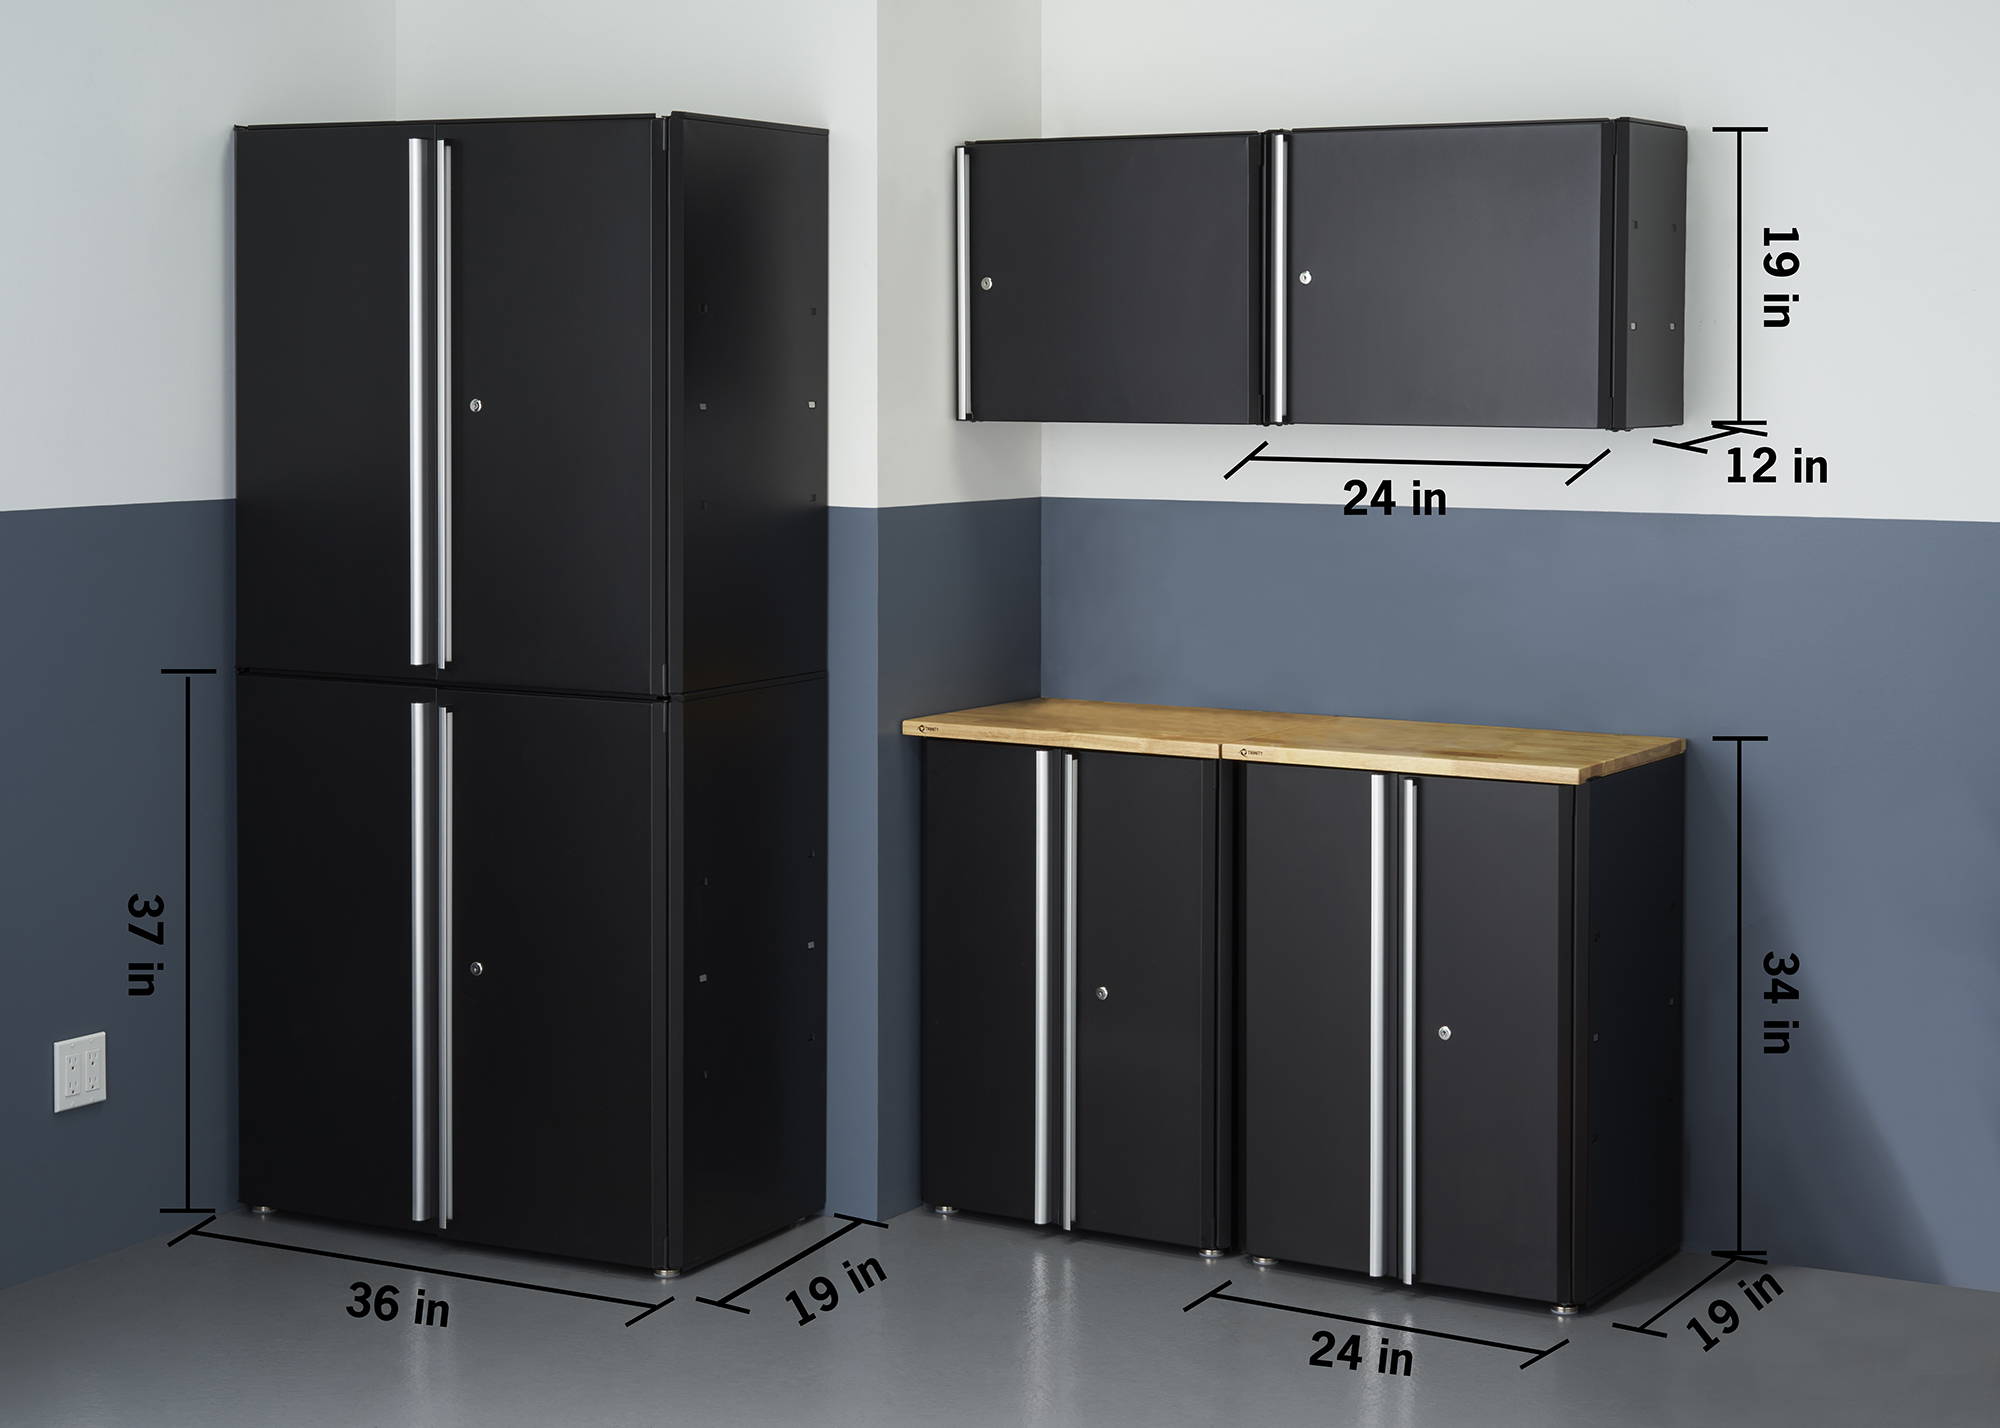 overall dimensions of the cabinets when placed side-by-side: 74 inches tall by 84 inches wide by 19 inches deep